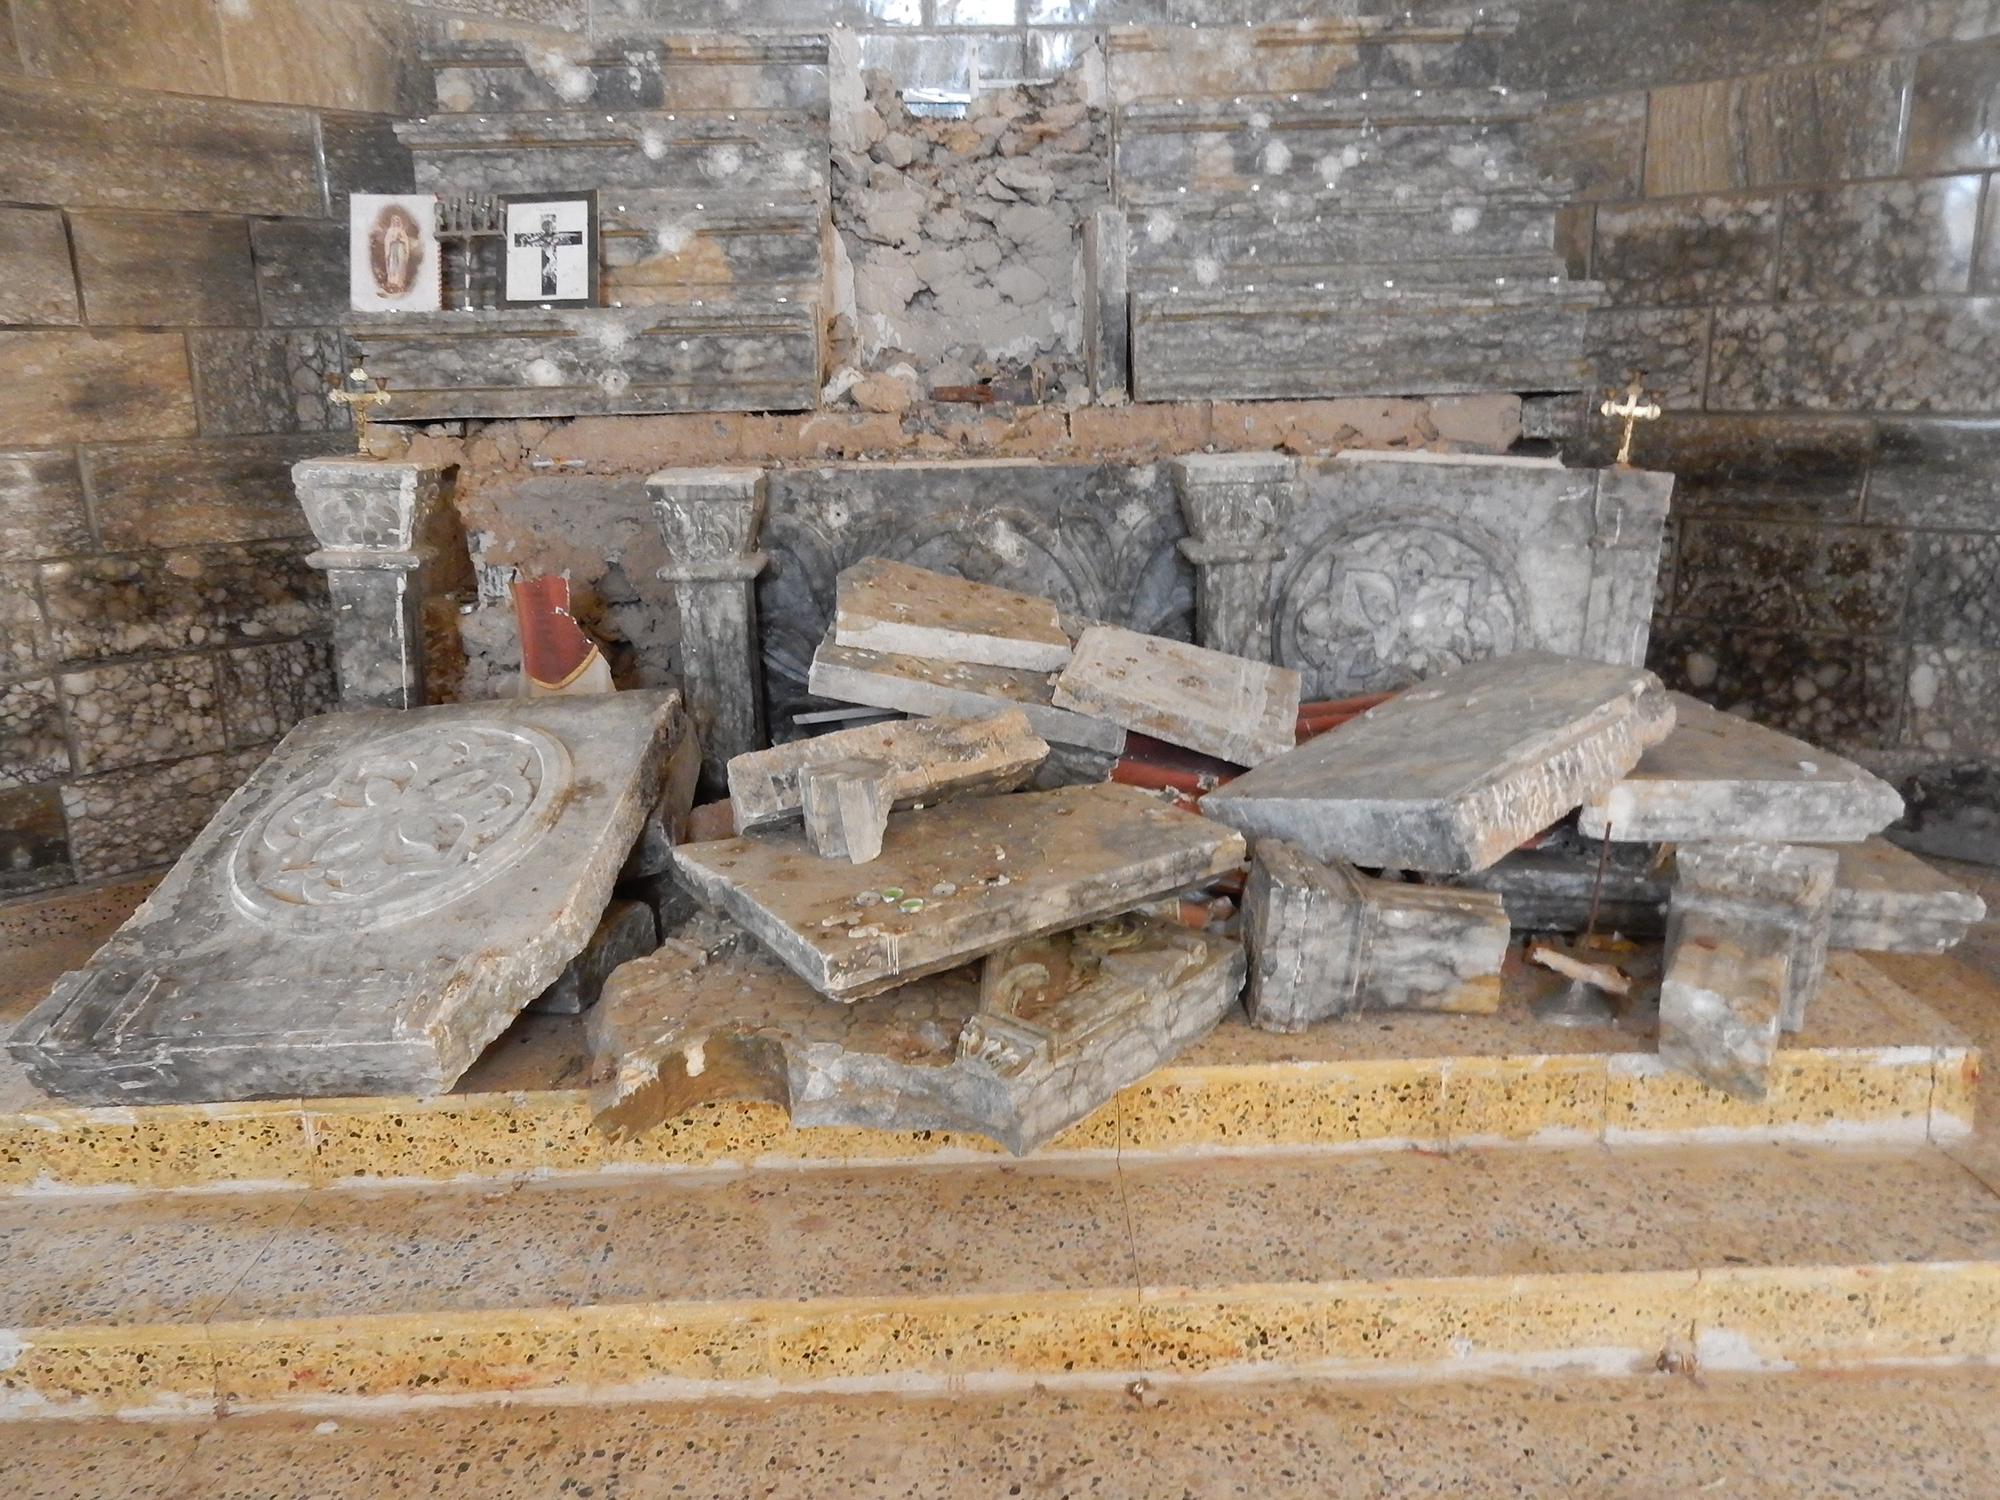 church tablets that have been destroyed